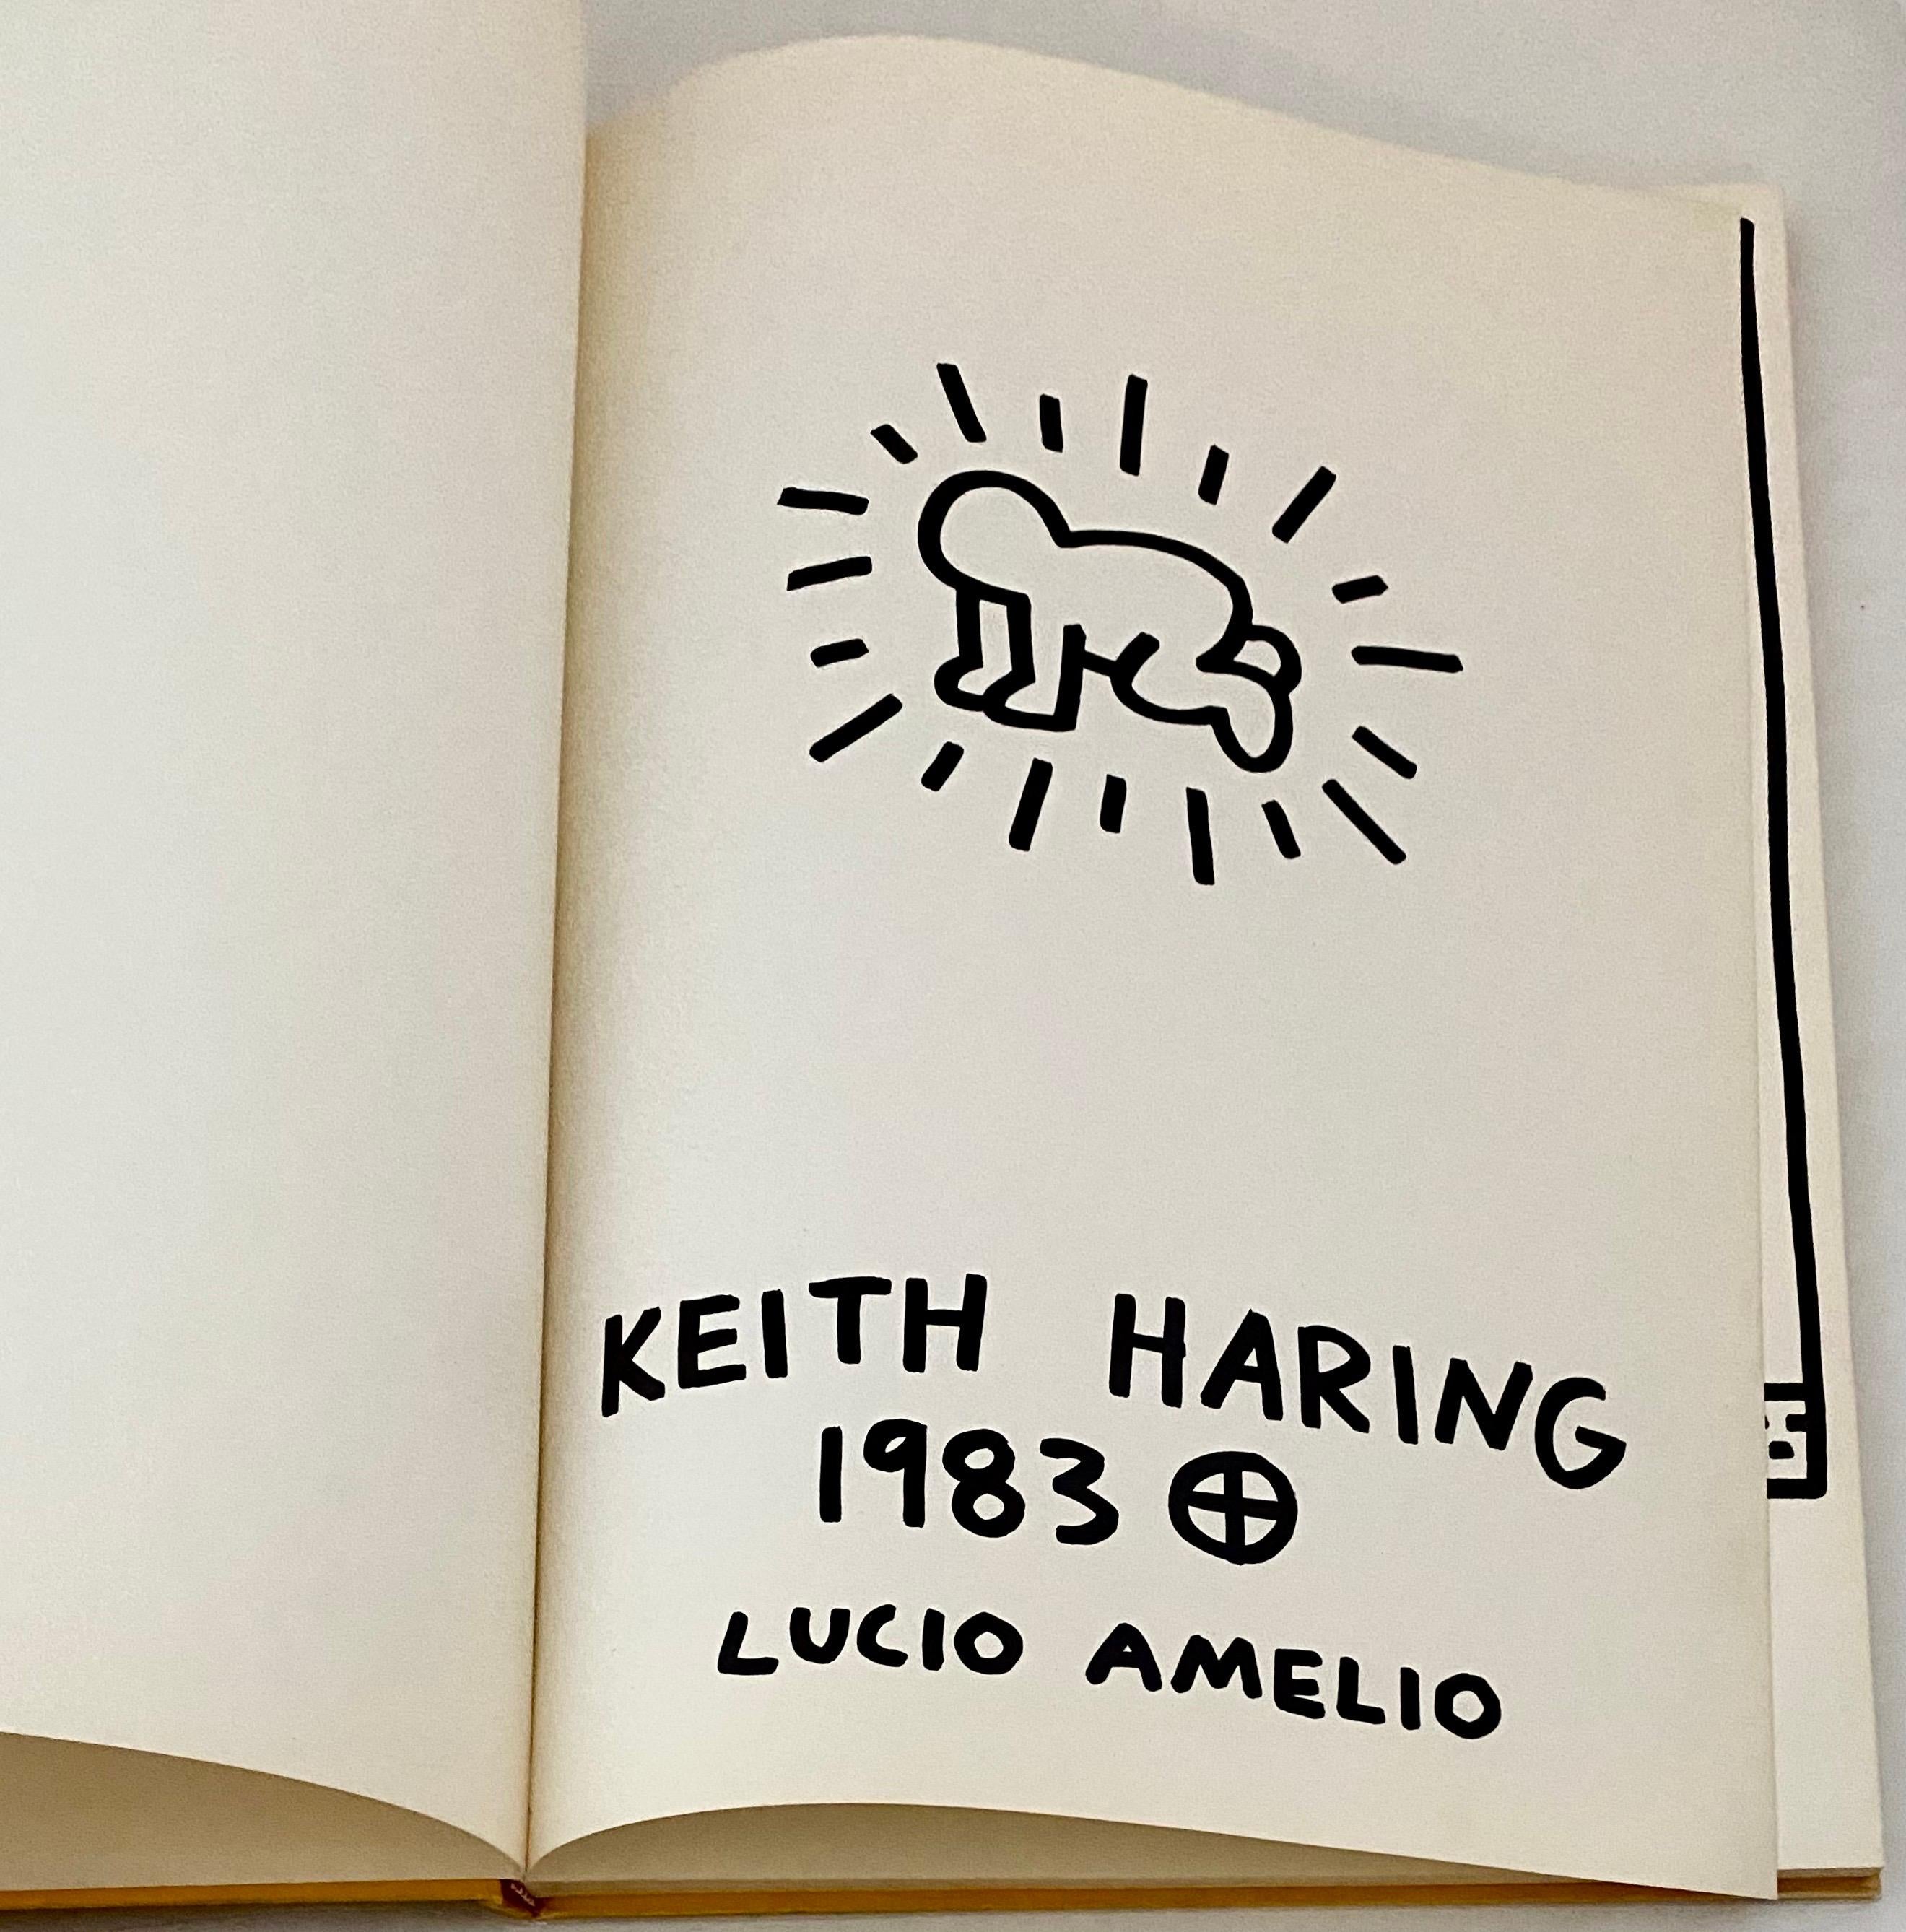 Keith Haring Lucio Amelio 1983:
The rare, much sought-after 1983 Keith Haring artist book containing 30 large sized original lithographs created by Haring on the occasion of: Keith Haring at Lucio Amelio Gallery, Naples 1983. From a limited edition